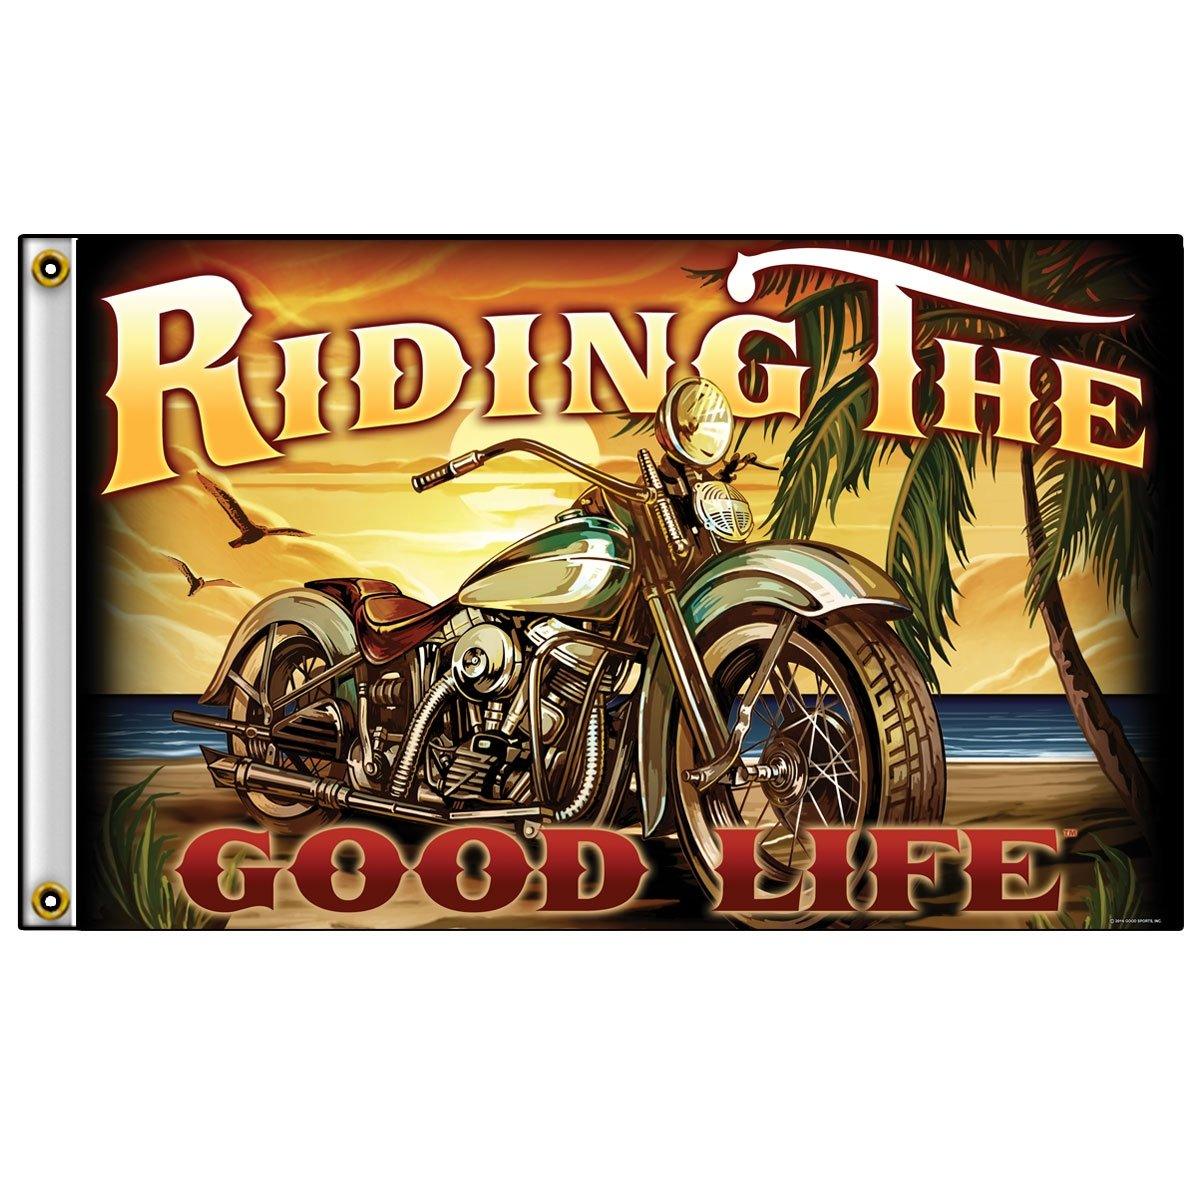 Hot Leathers Riding The Good Life Flag - American Legend Rider